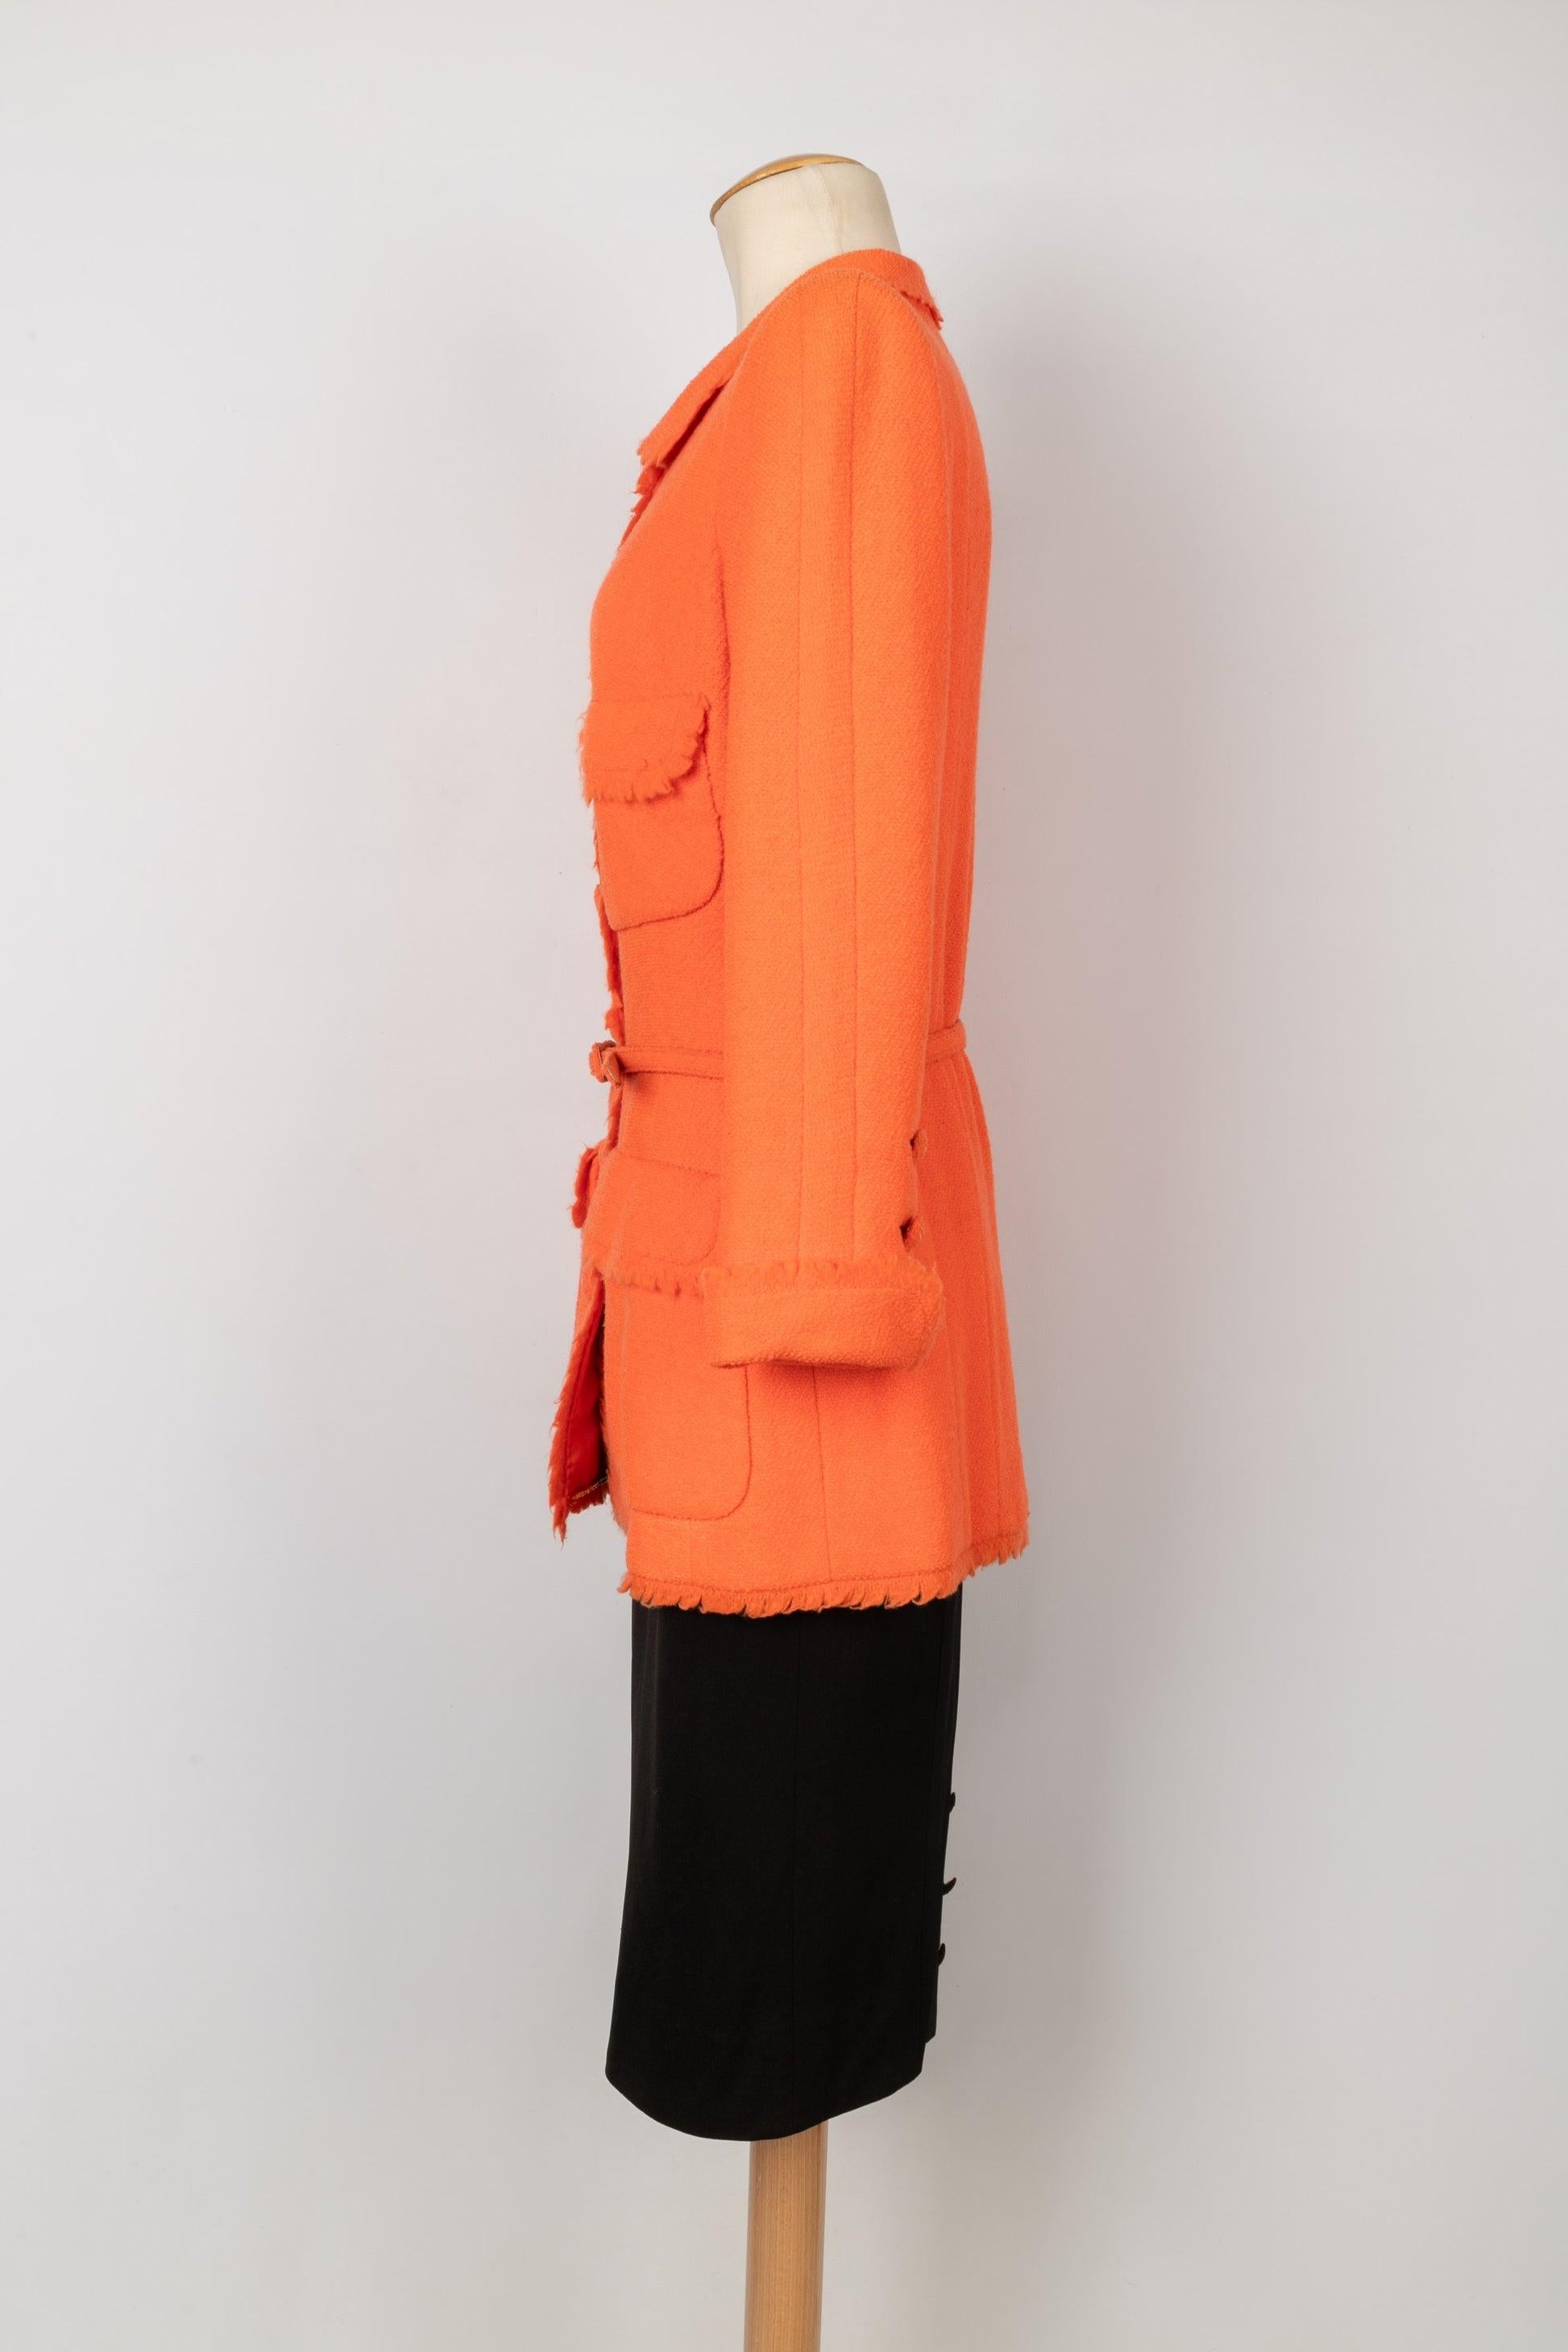 Chanel - Suit composed of a fringed orange curly wool jacket with a silk lining and a black silk jersey skirt. No size indicated, it fits a 36FR. 1995 Spring-Summer Haute Couture Collection.

Additional information:
Condition: Good